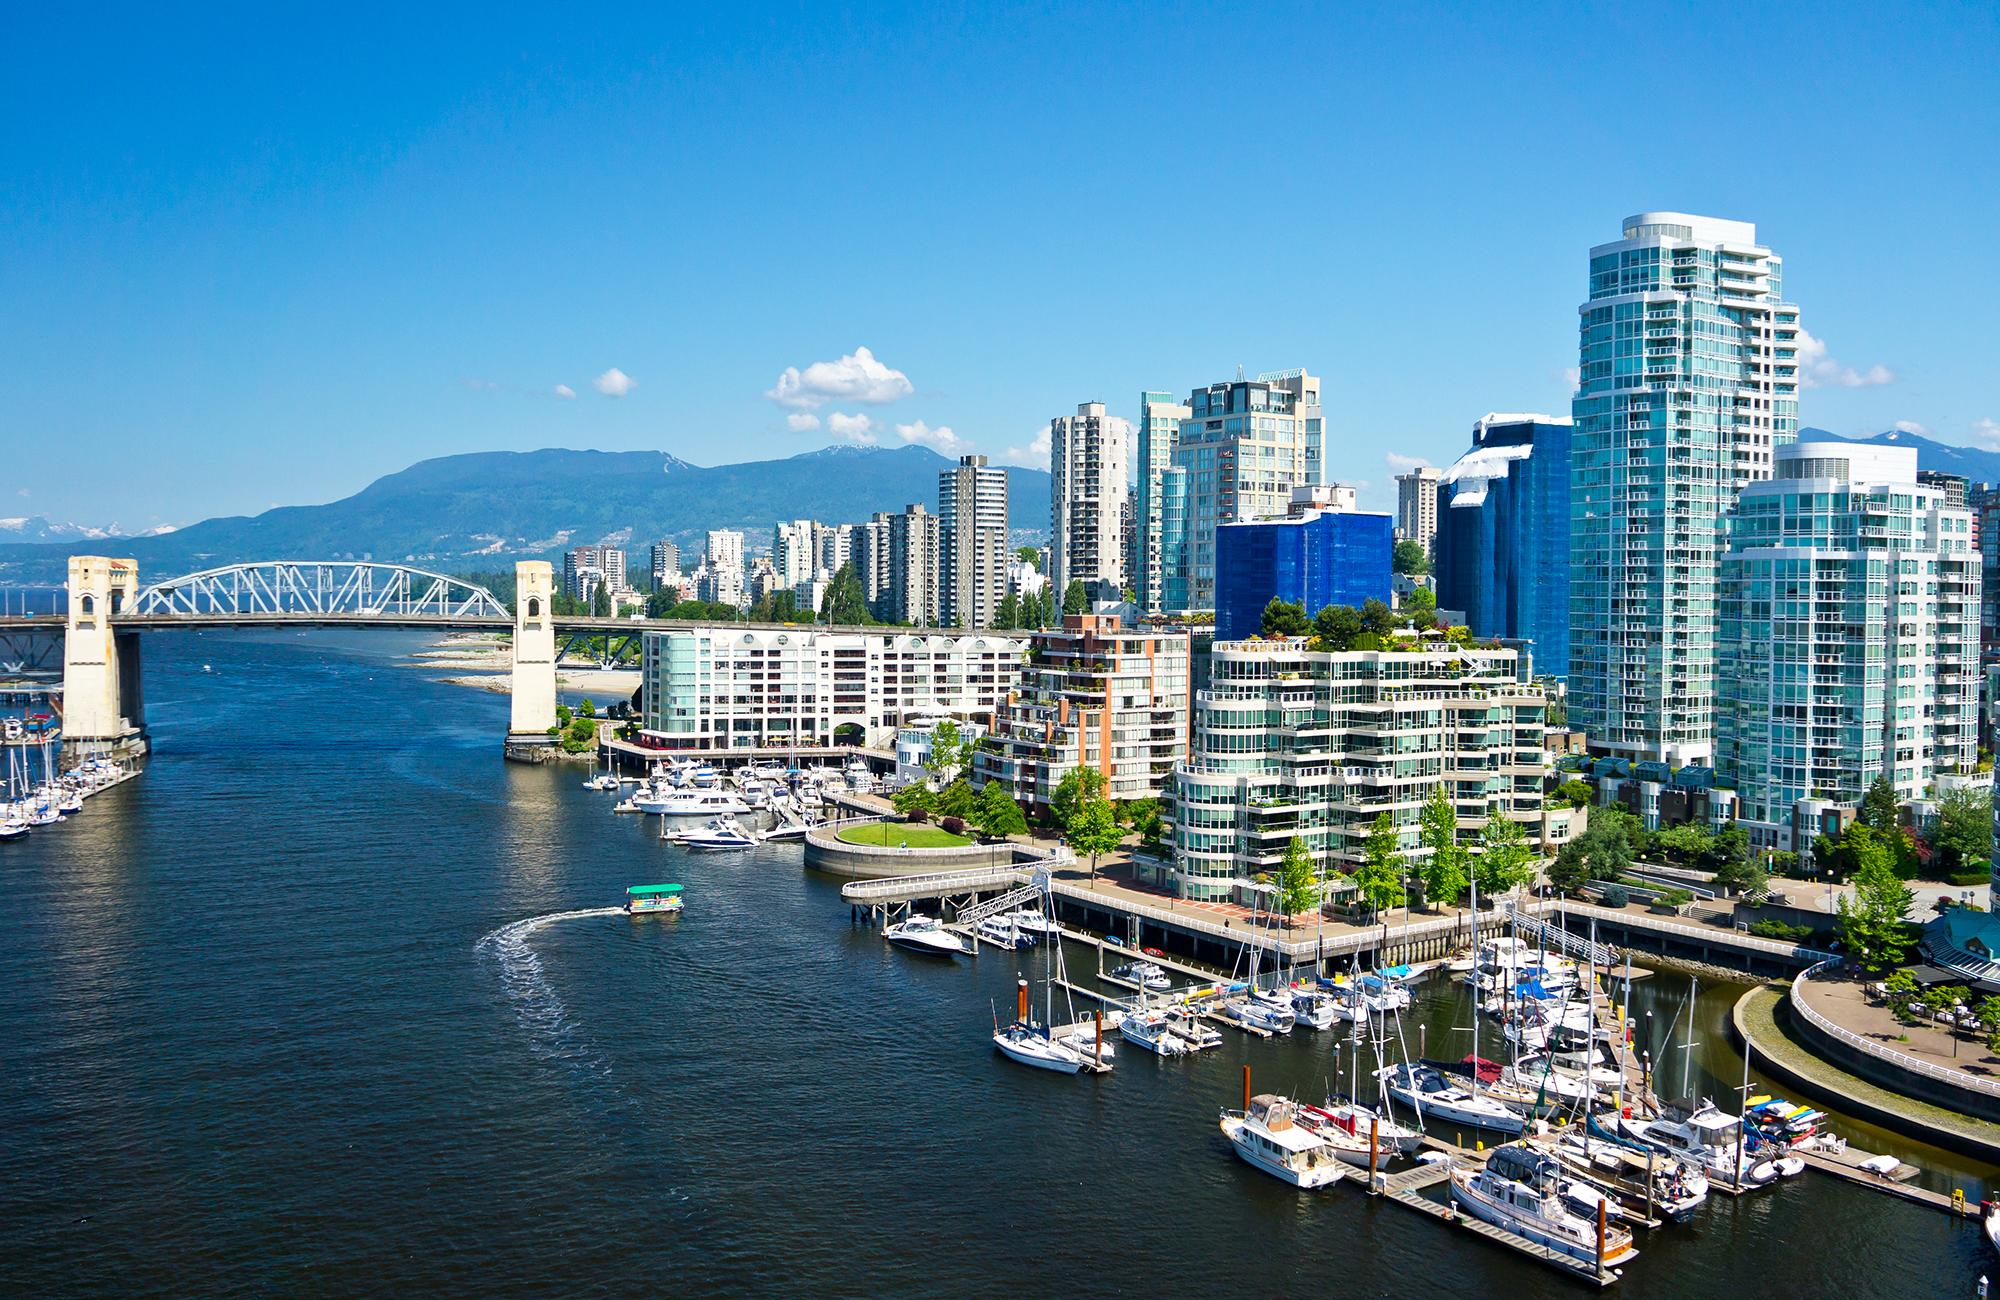 1-Day Itinerary for Vancouver, Canada